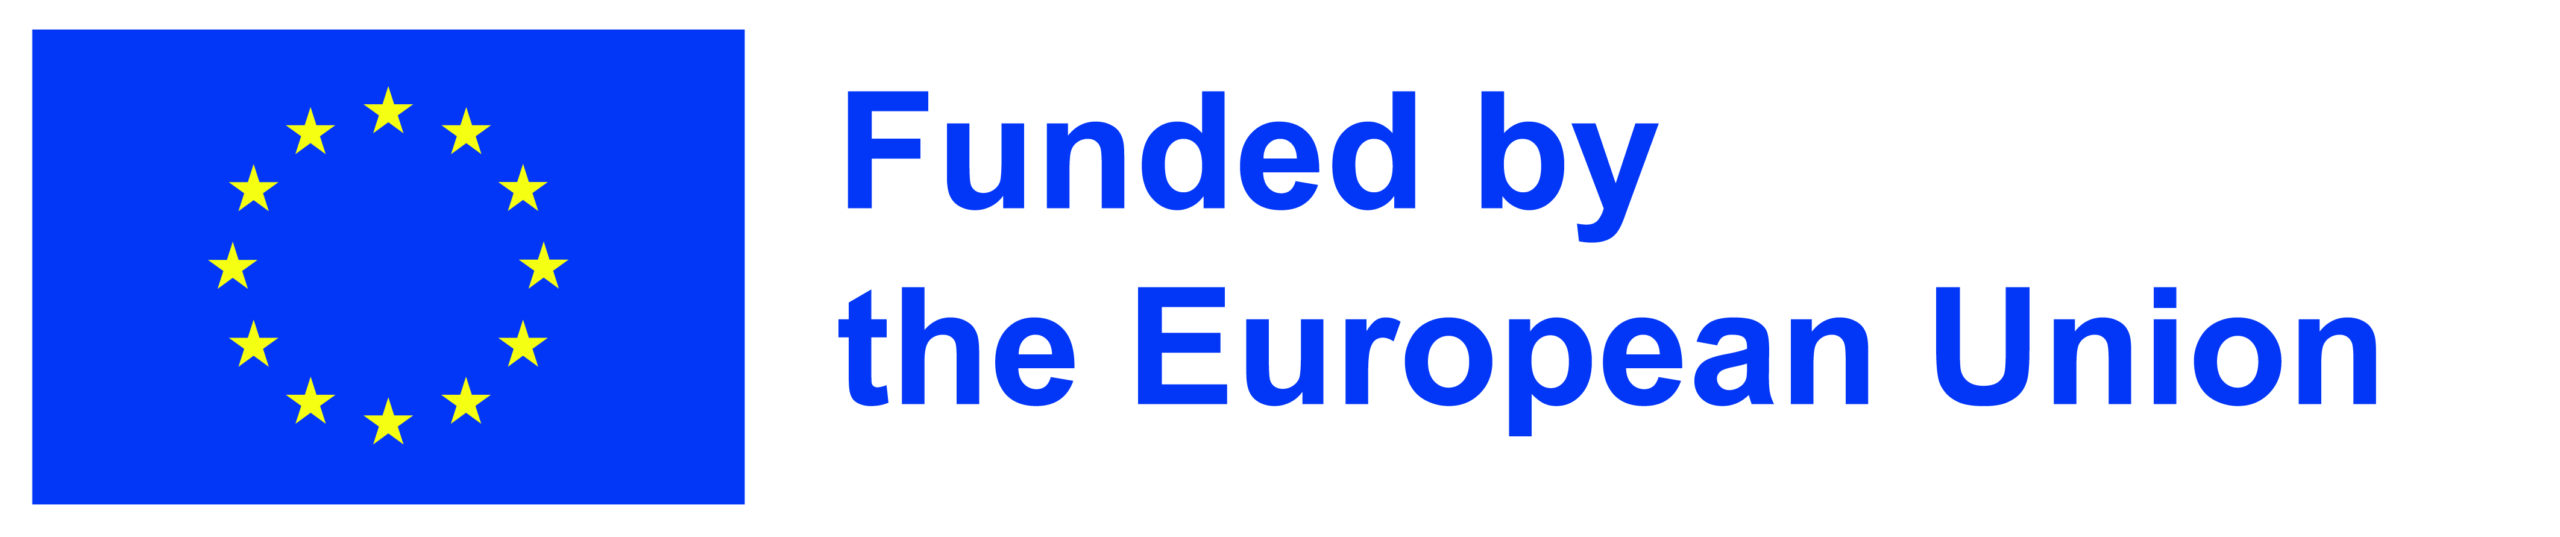 This project has received funding from the European Union’s Horizon Europe research and innovation funding programme under Grant Agreement No 101058449. Subvención total: 4.651.014 euros. Subvención para ITENE: 462.125,00 €